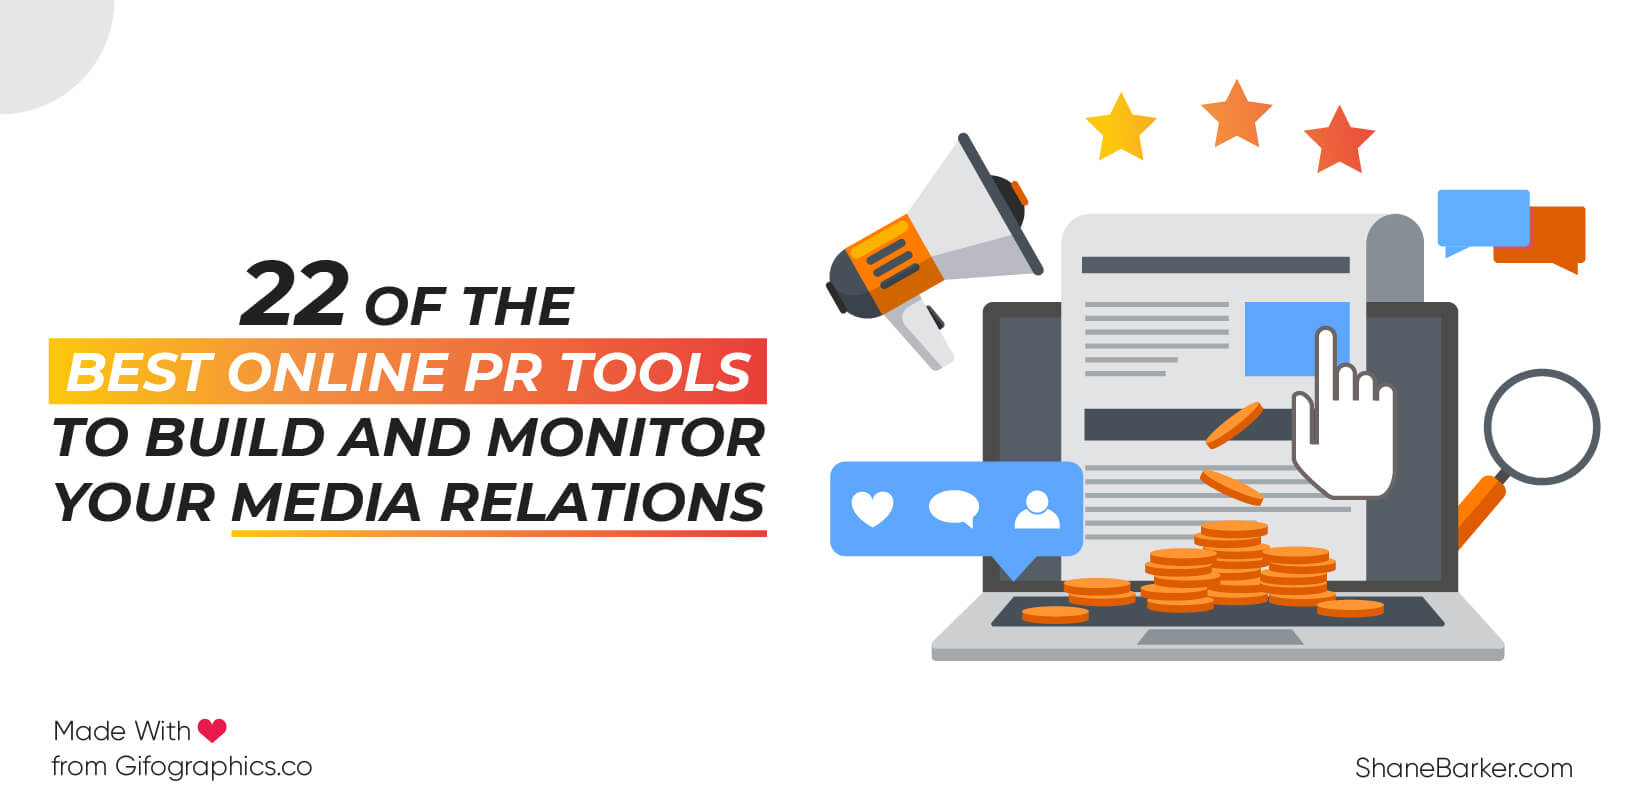 22 best online pr tools to build and monitor media relations